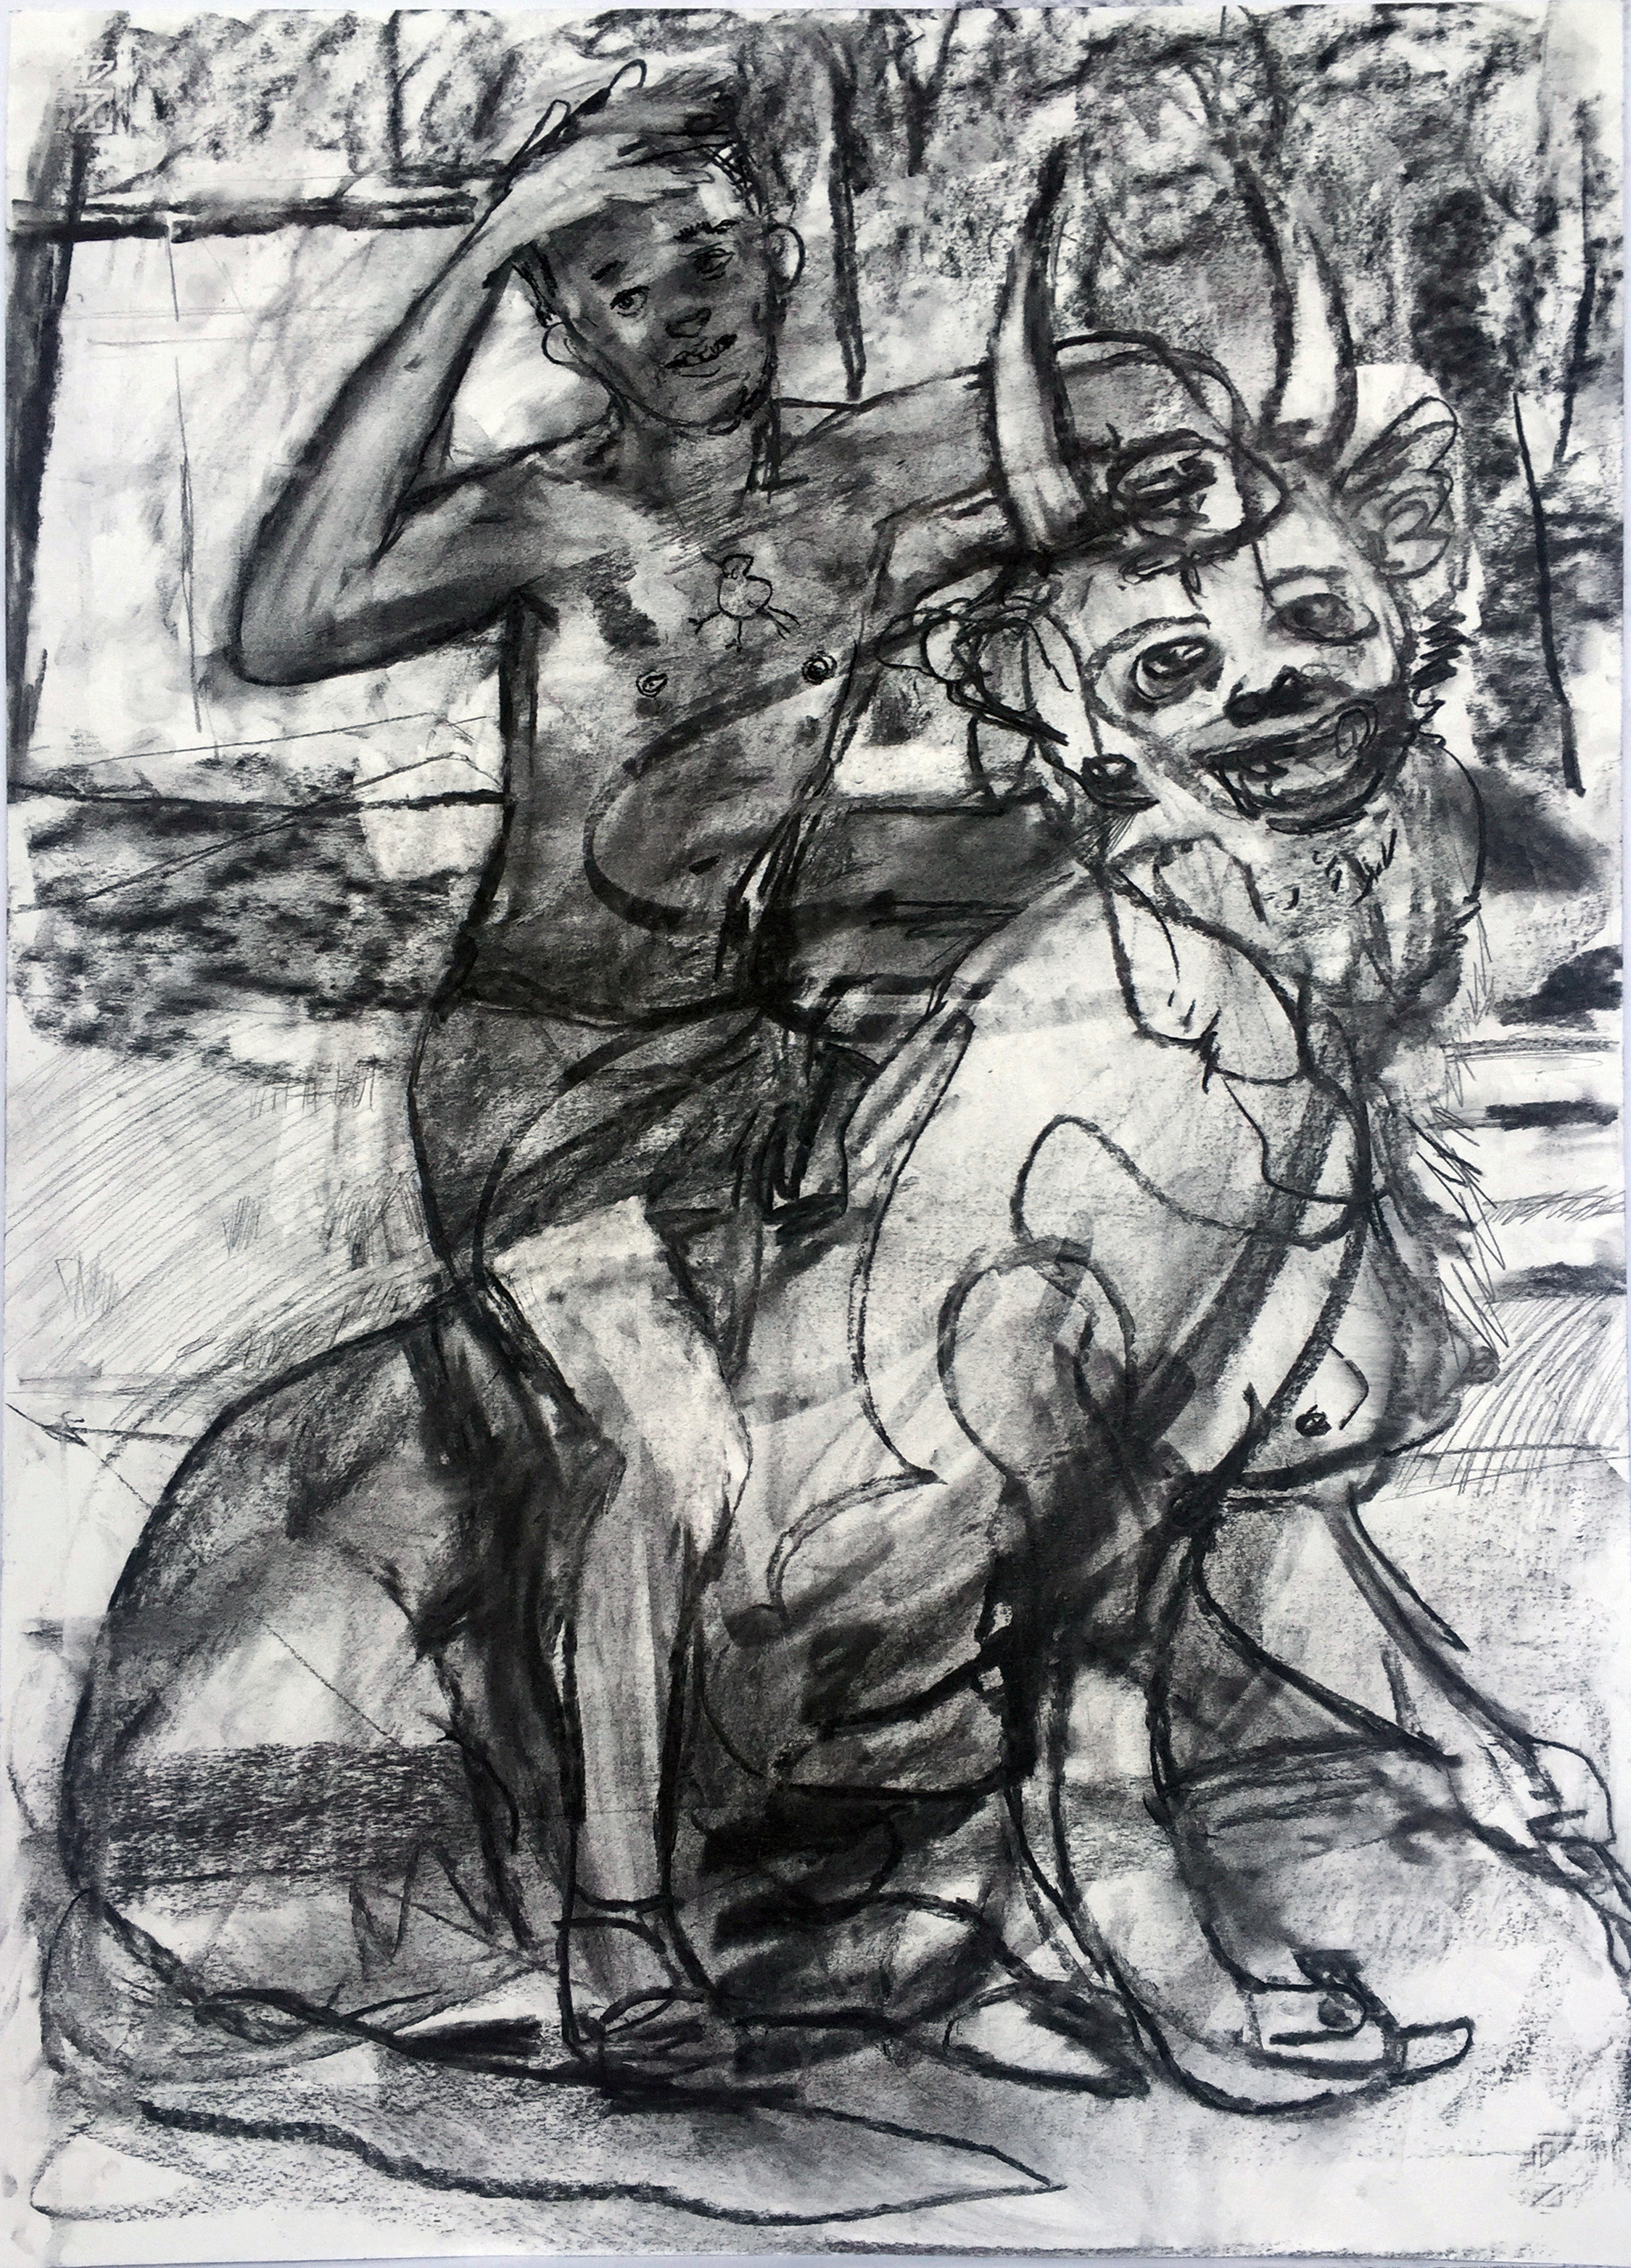 Son and fiend 18 by 24 inches charcoal on paper 2017.jpg